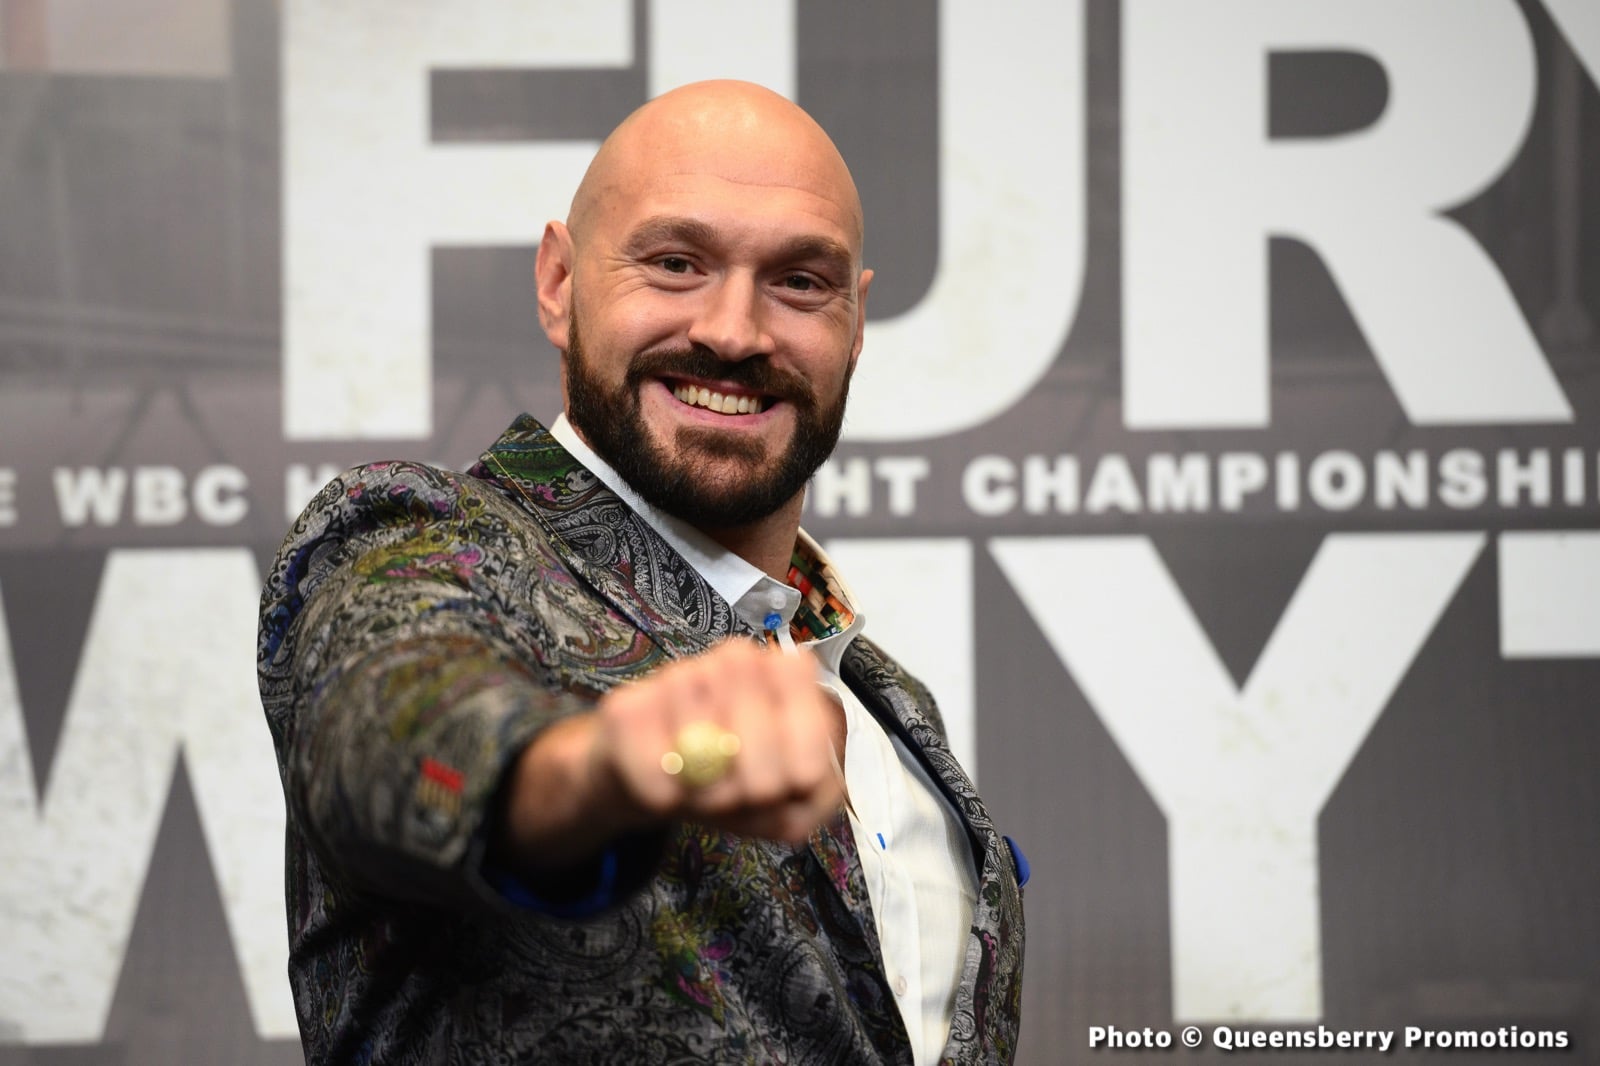 Image: Dillian Whyte can't avoid Tyson Fury says Sugarhill